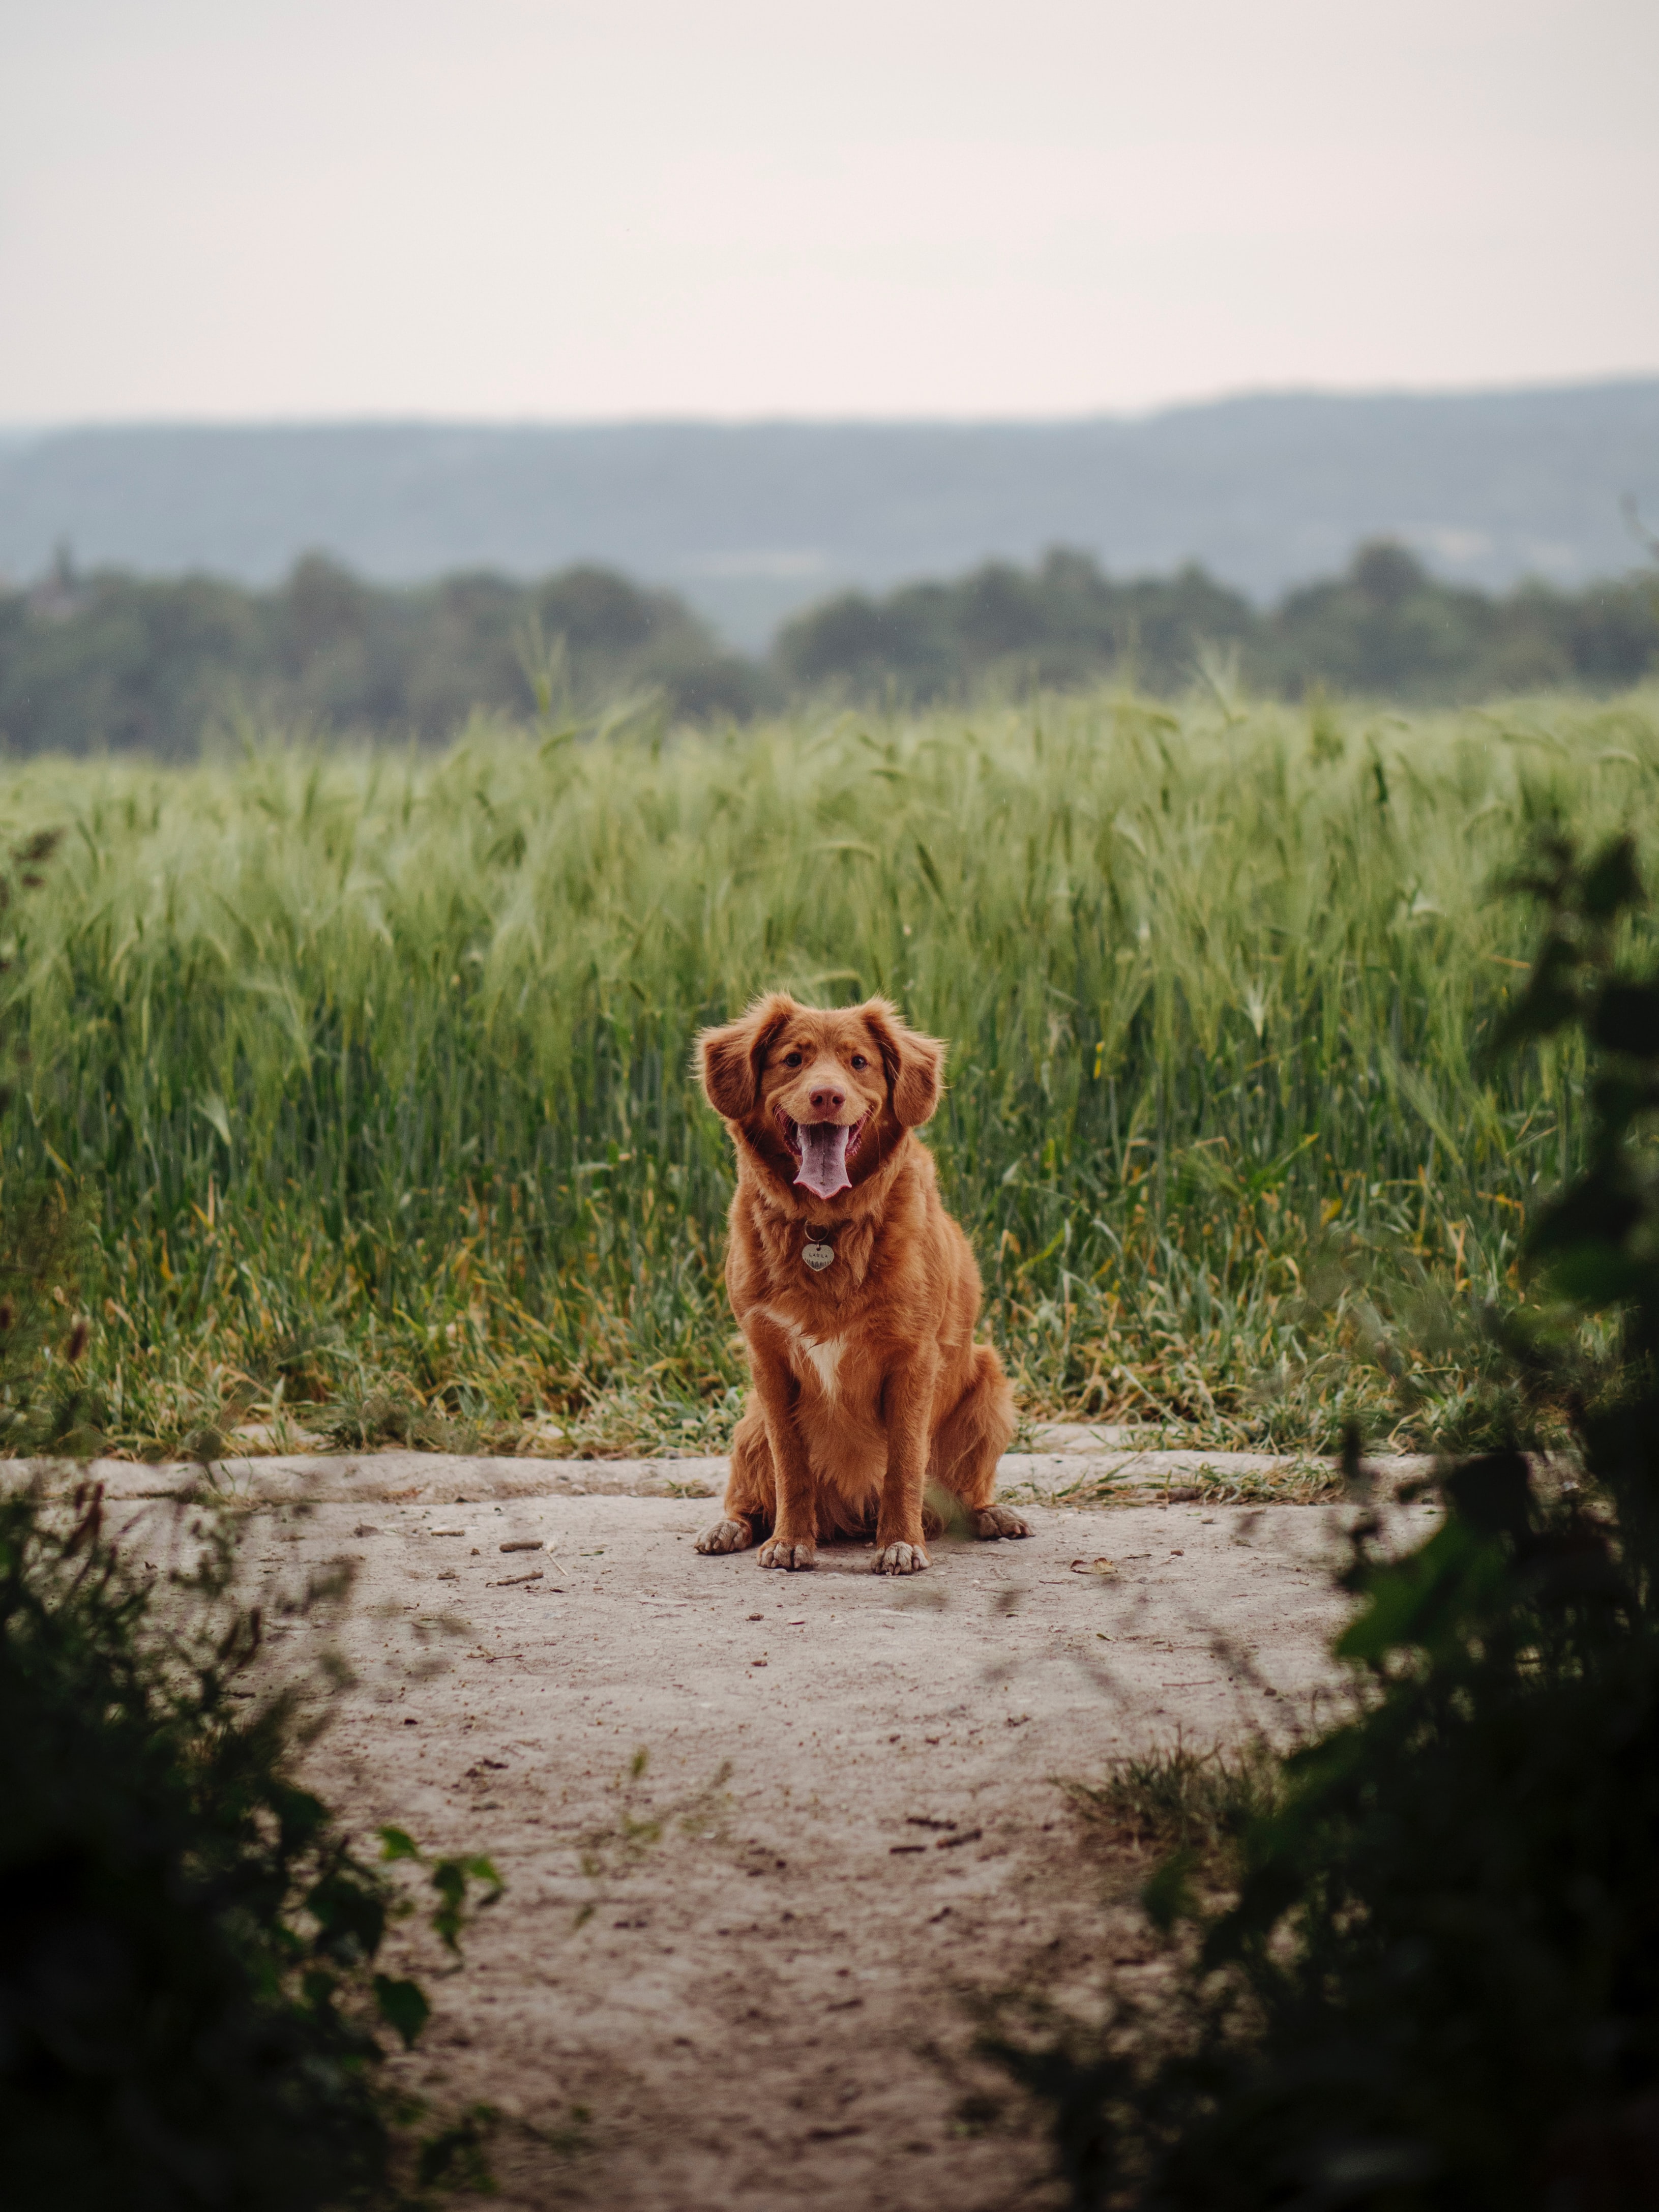 wallpapers animals, grass, dog, protruding tongue, tongue stuck out, retriever